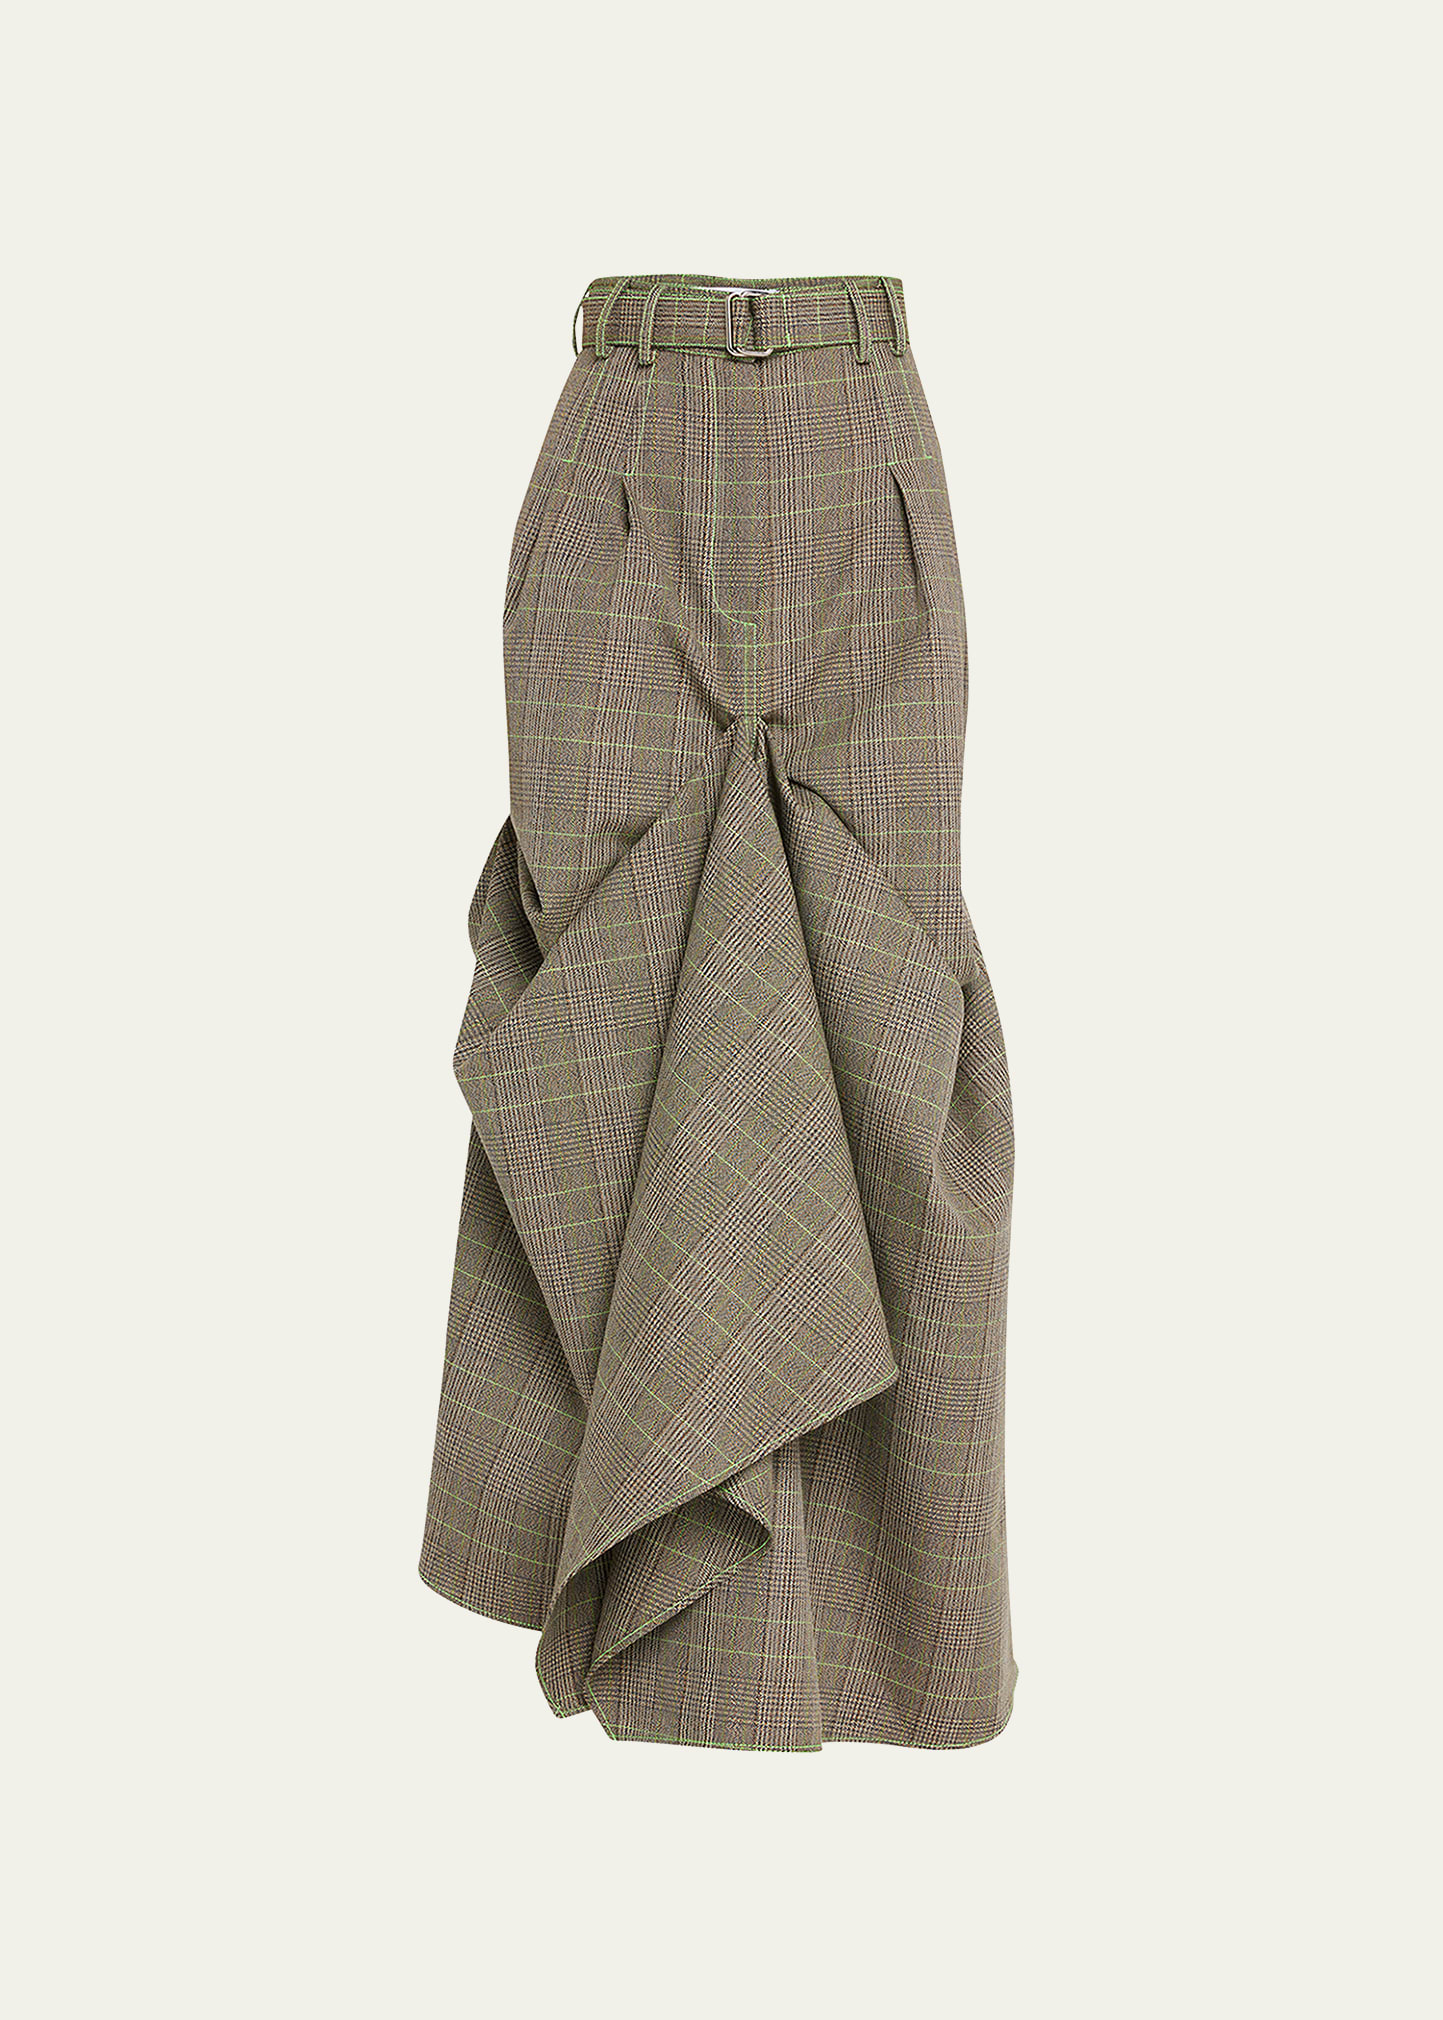 Prince of Wales Tucked Wool Trumpet Skirt with Belt